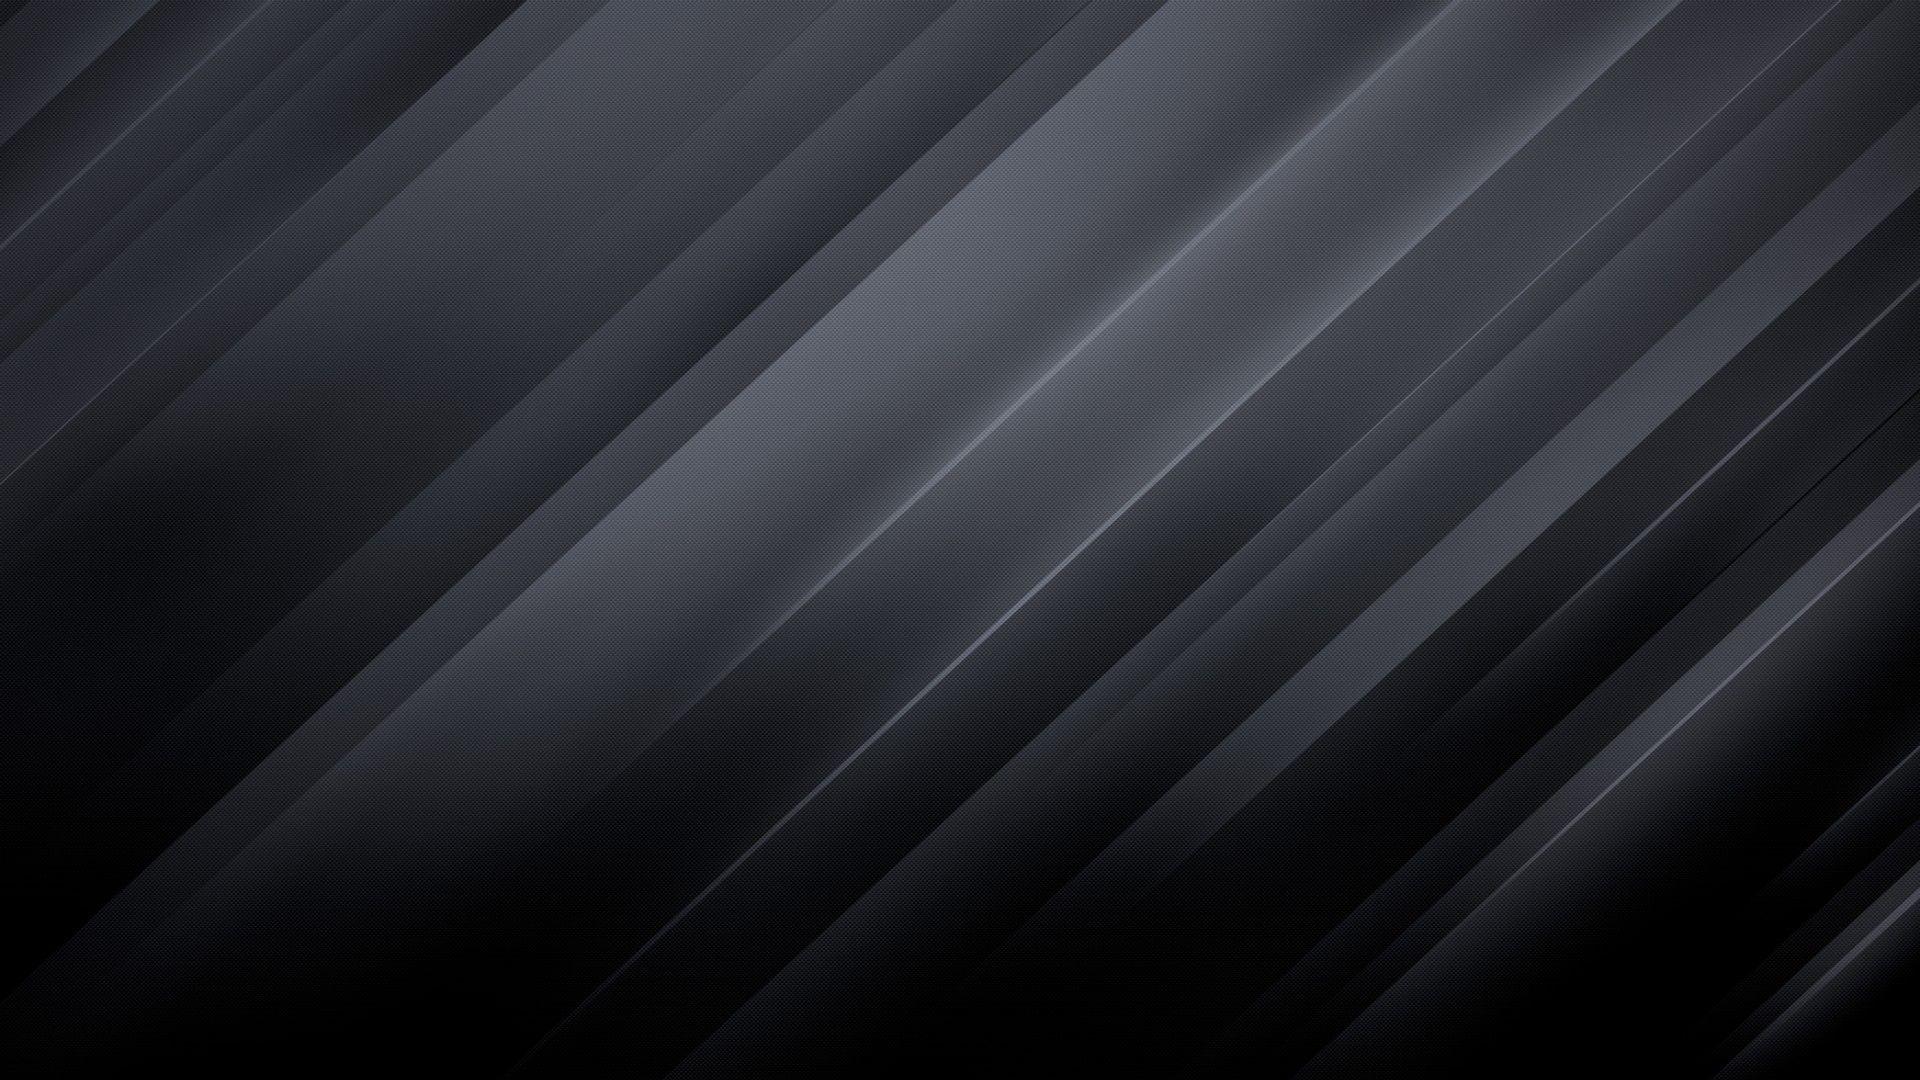 Black 1920X1080 Wallpapers - Top Free Black 1920X1080 Backgrounds ...